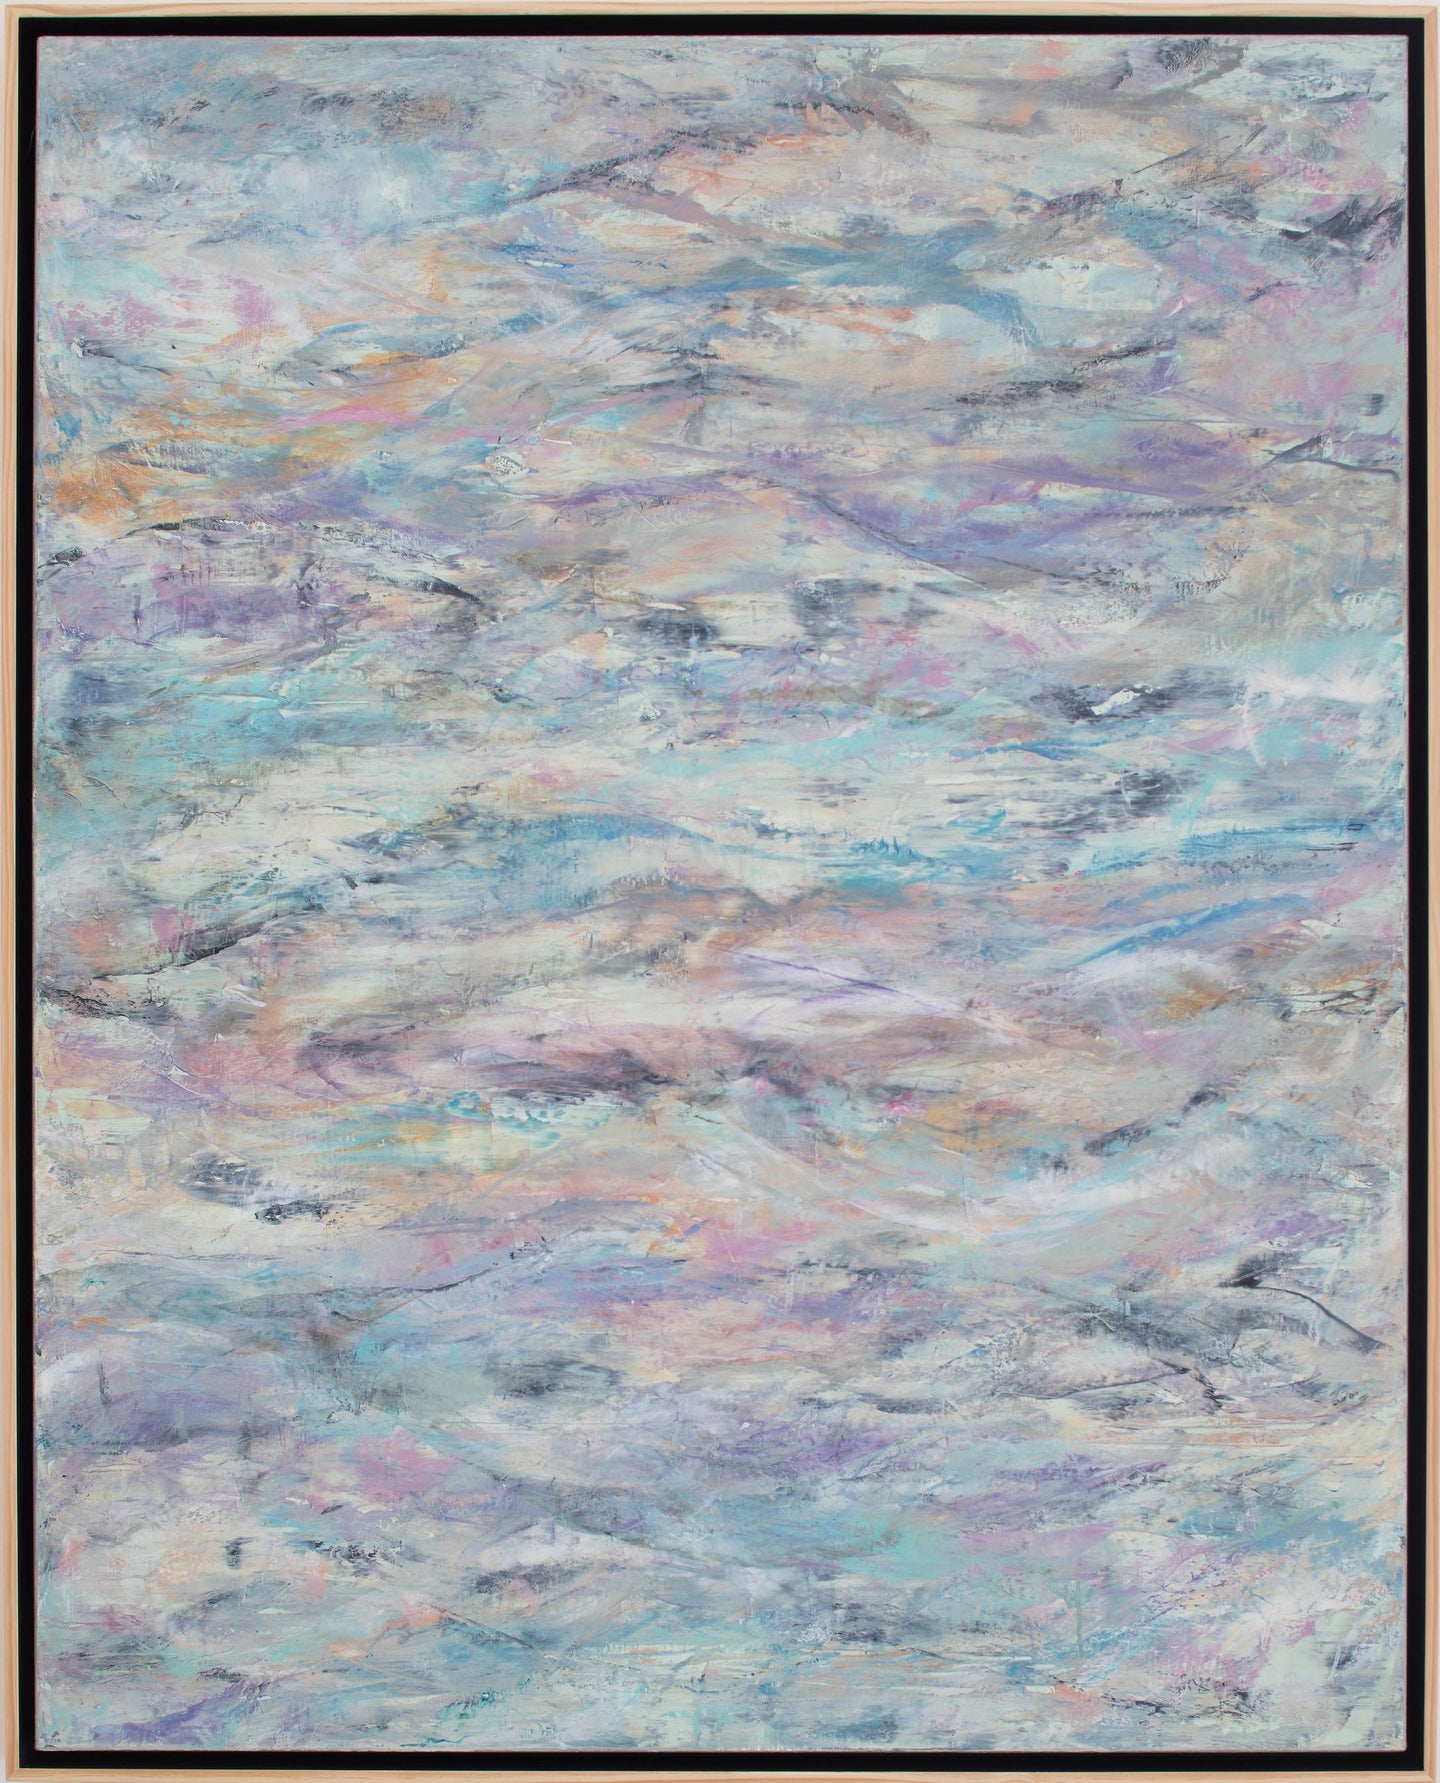 Framed:Jill Krutick (B. 1962- ) Waves II, 2015 Oil on Canvas, 60 x 48 inches  The gentle ebb and flow of pigments in this piece create a meditative mural of the ocean's character in this beautiful large abstract seascape. The stacked, layered marks create a consistent rhythm in its composition; using pastel colors of blue, pink and purples, accented by deep, muted blues to emphasize the strokes. 